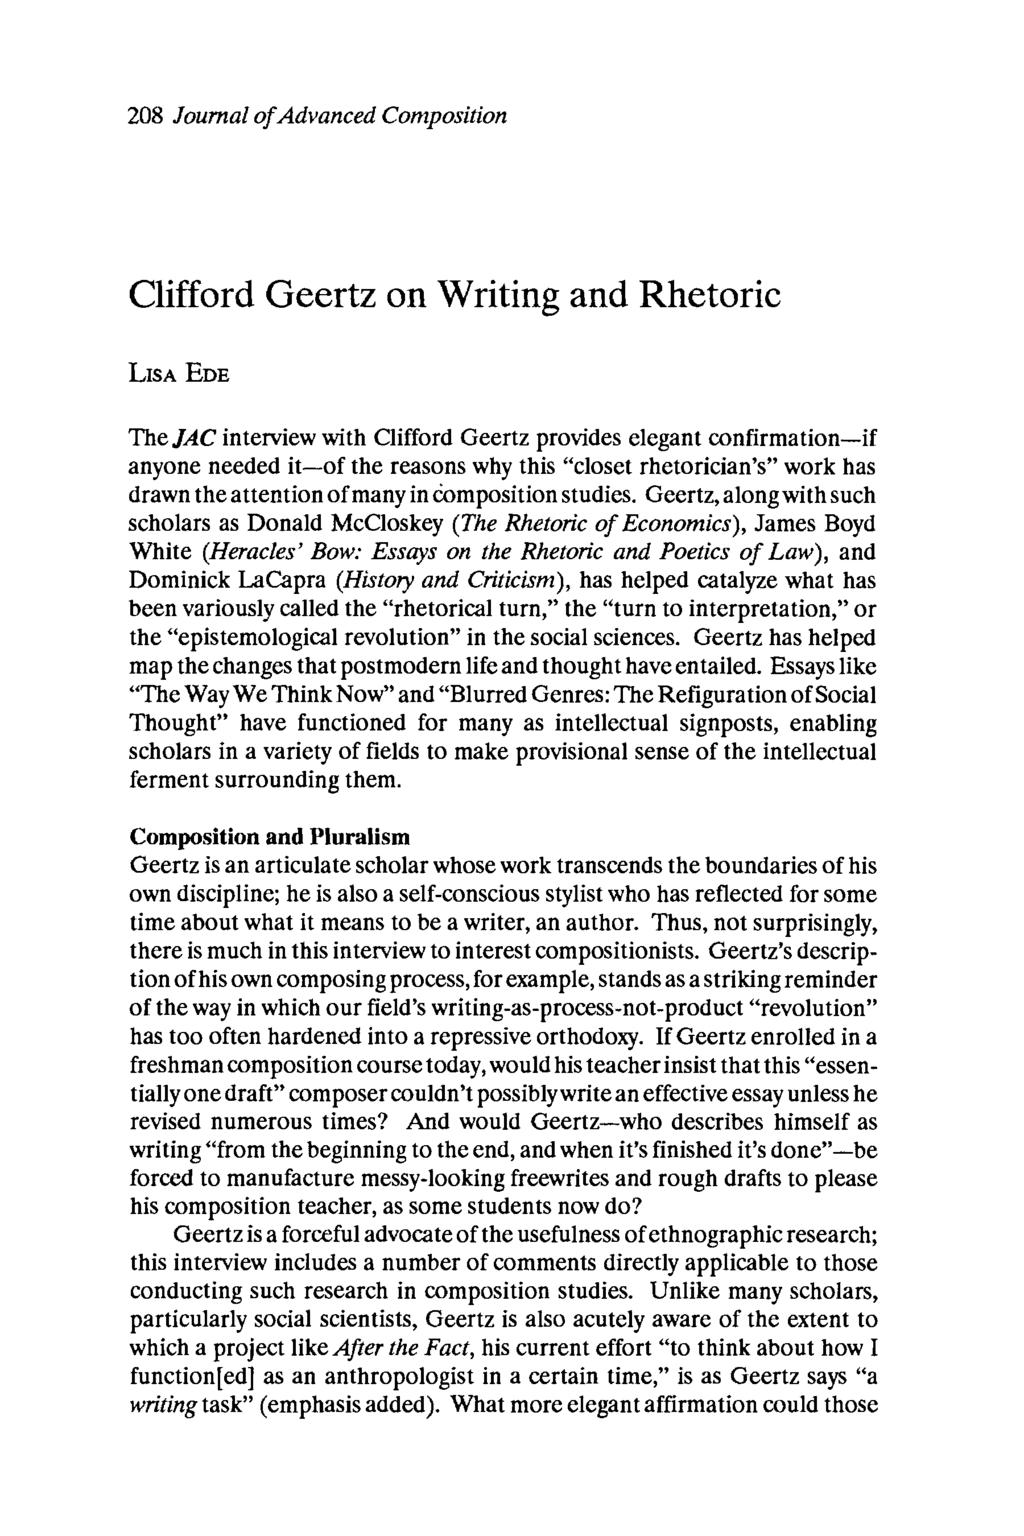 208 Journal of Advanced Composition Clifford Geertz on Writing and Rhetoric LISA EDE TheJAC interview with Clifford Geertz provides elegant confirmation-if anyone needed it-of the reasons why this